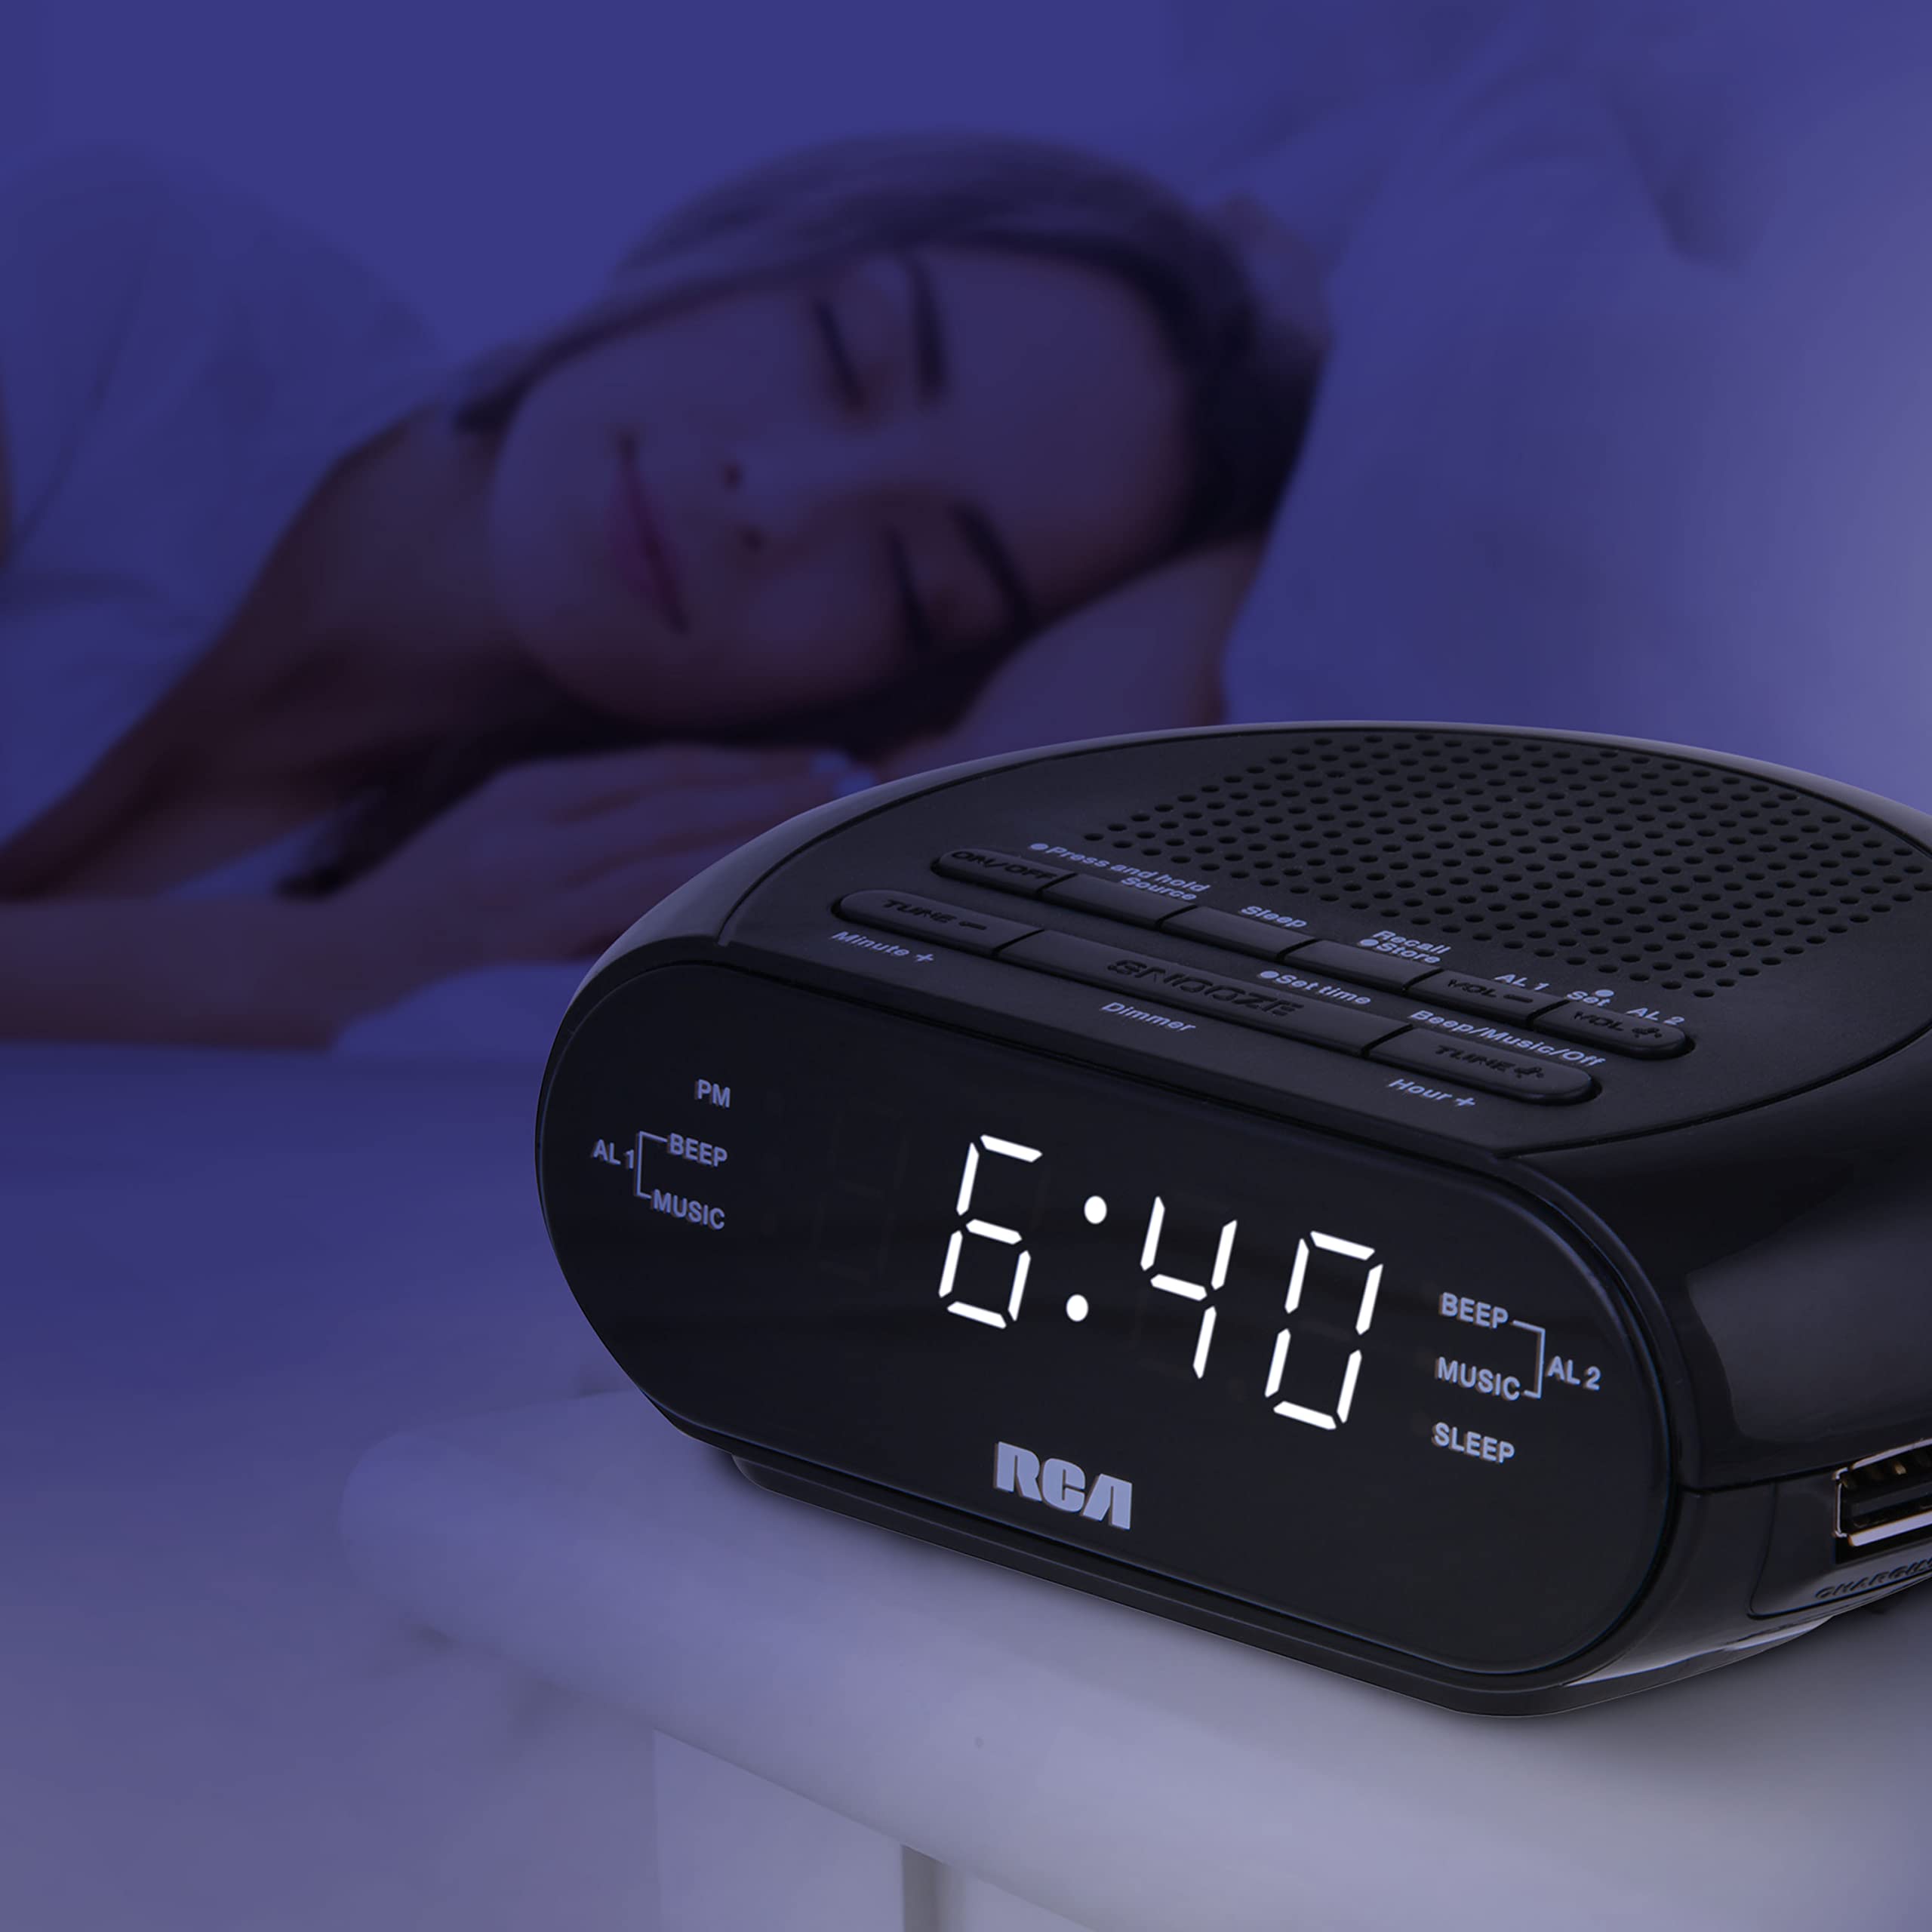 RCA RCS27 Digital Radio Alarm Clock with Soothing Sounds, Brightness Control, and USB Charging Port